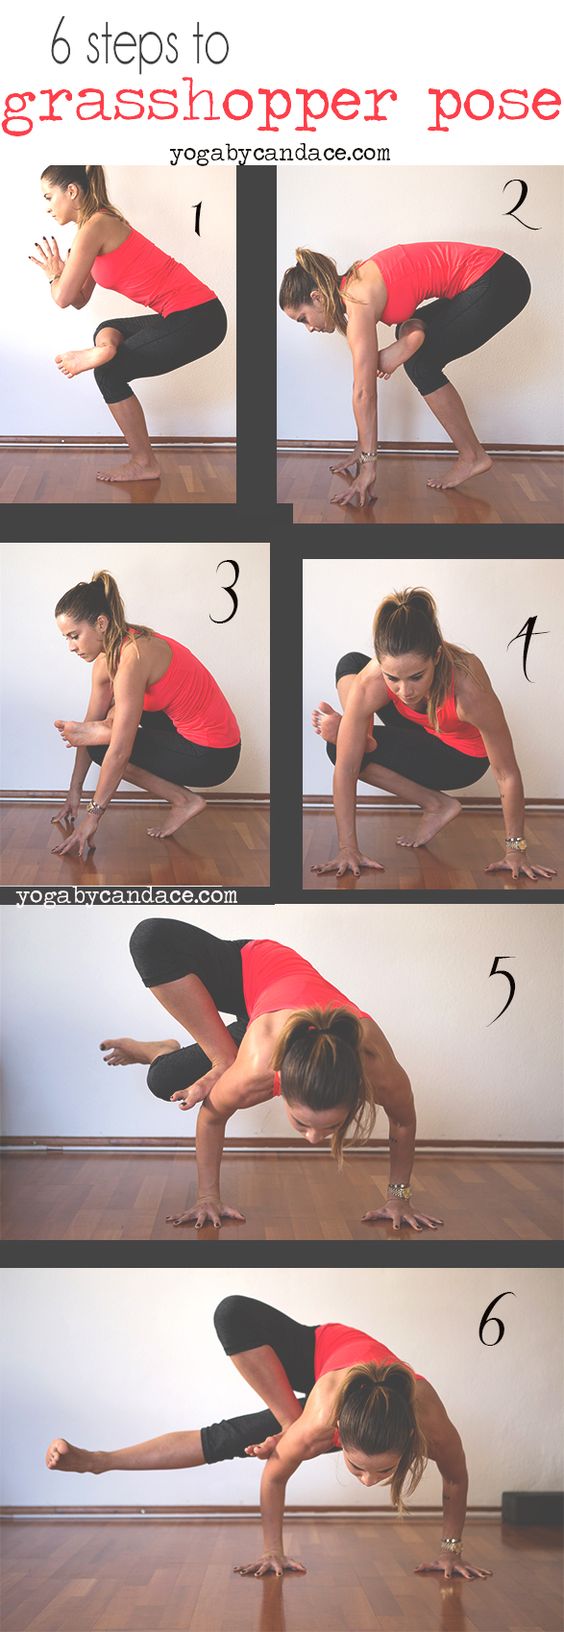 Pin now, practice later! How to do grasshopper pose. Wearing: Zella leggings, Sweaty Betty tank